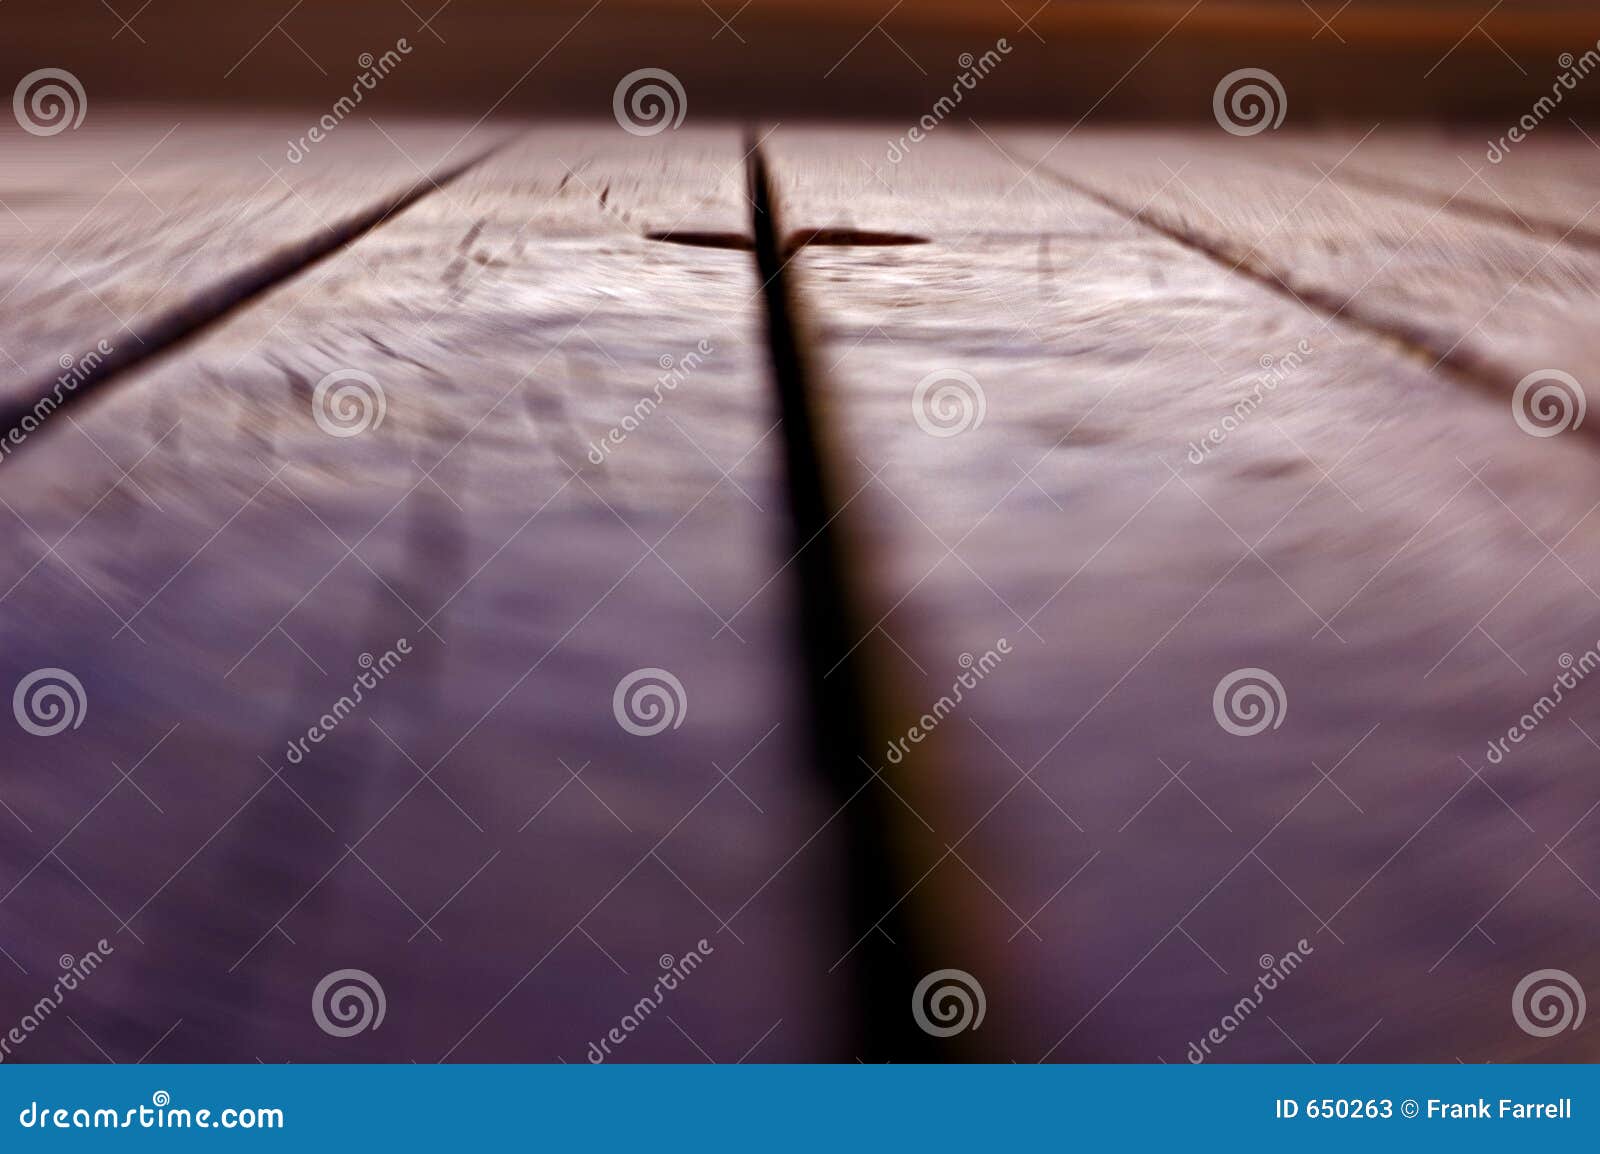 background - wooden table